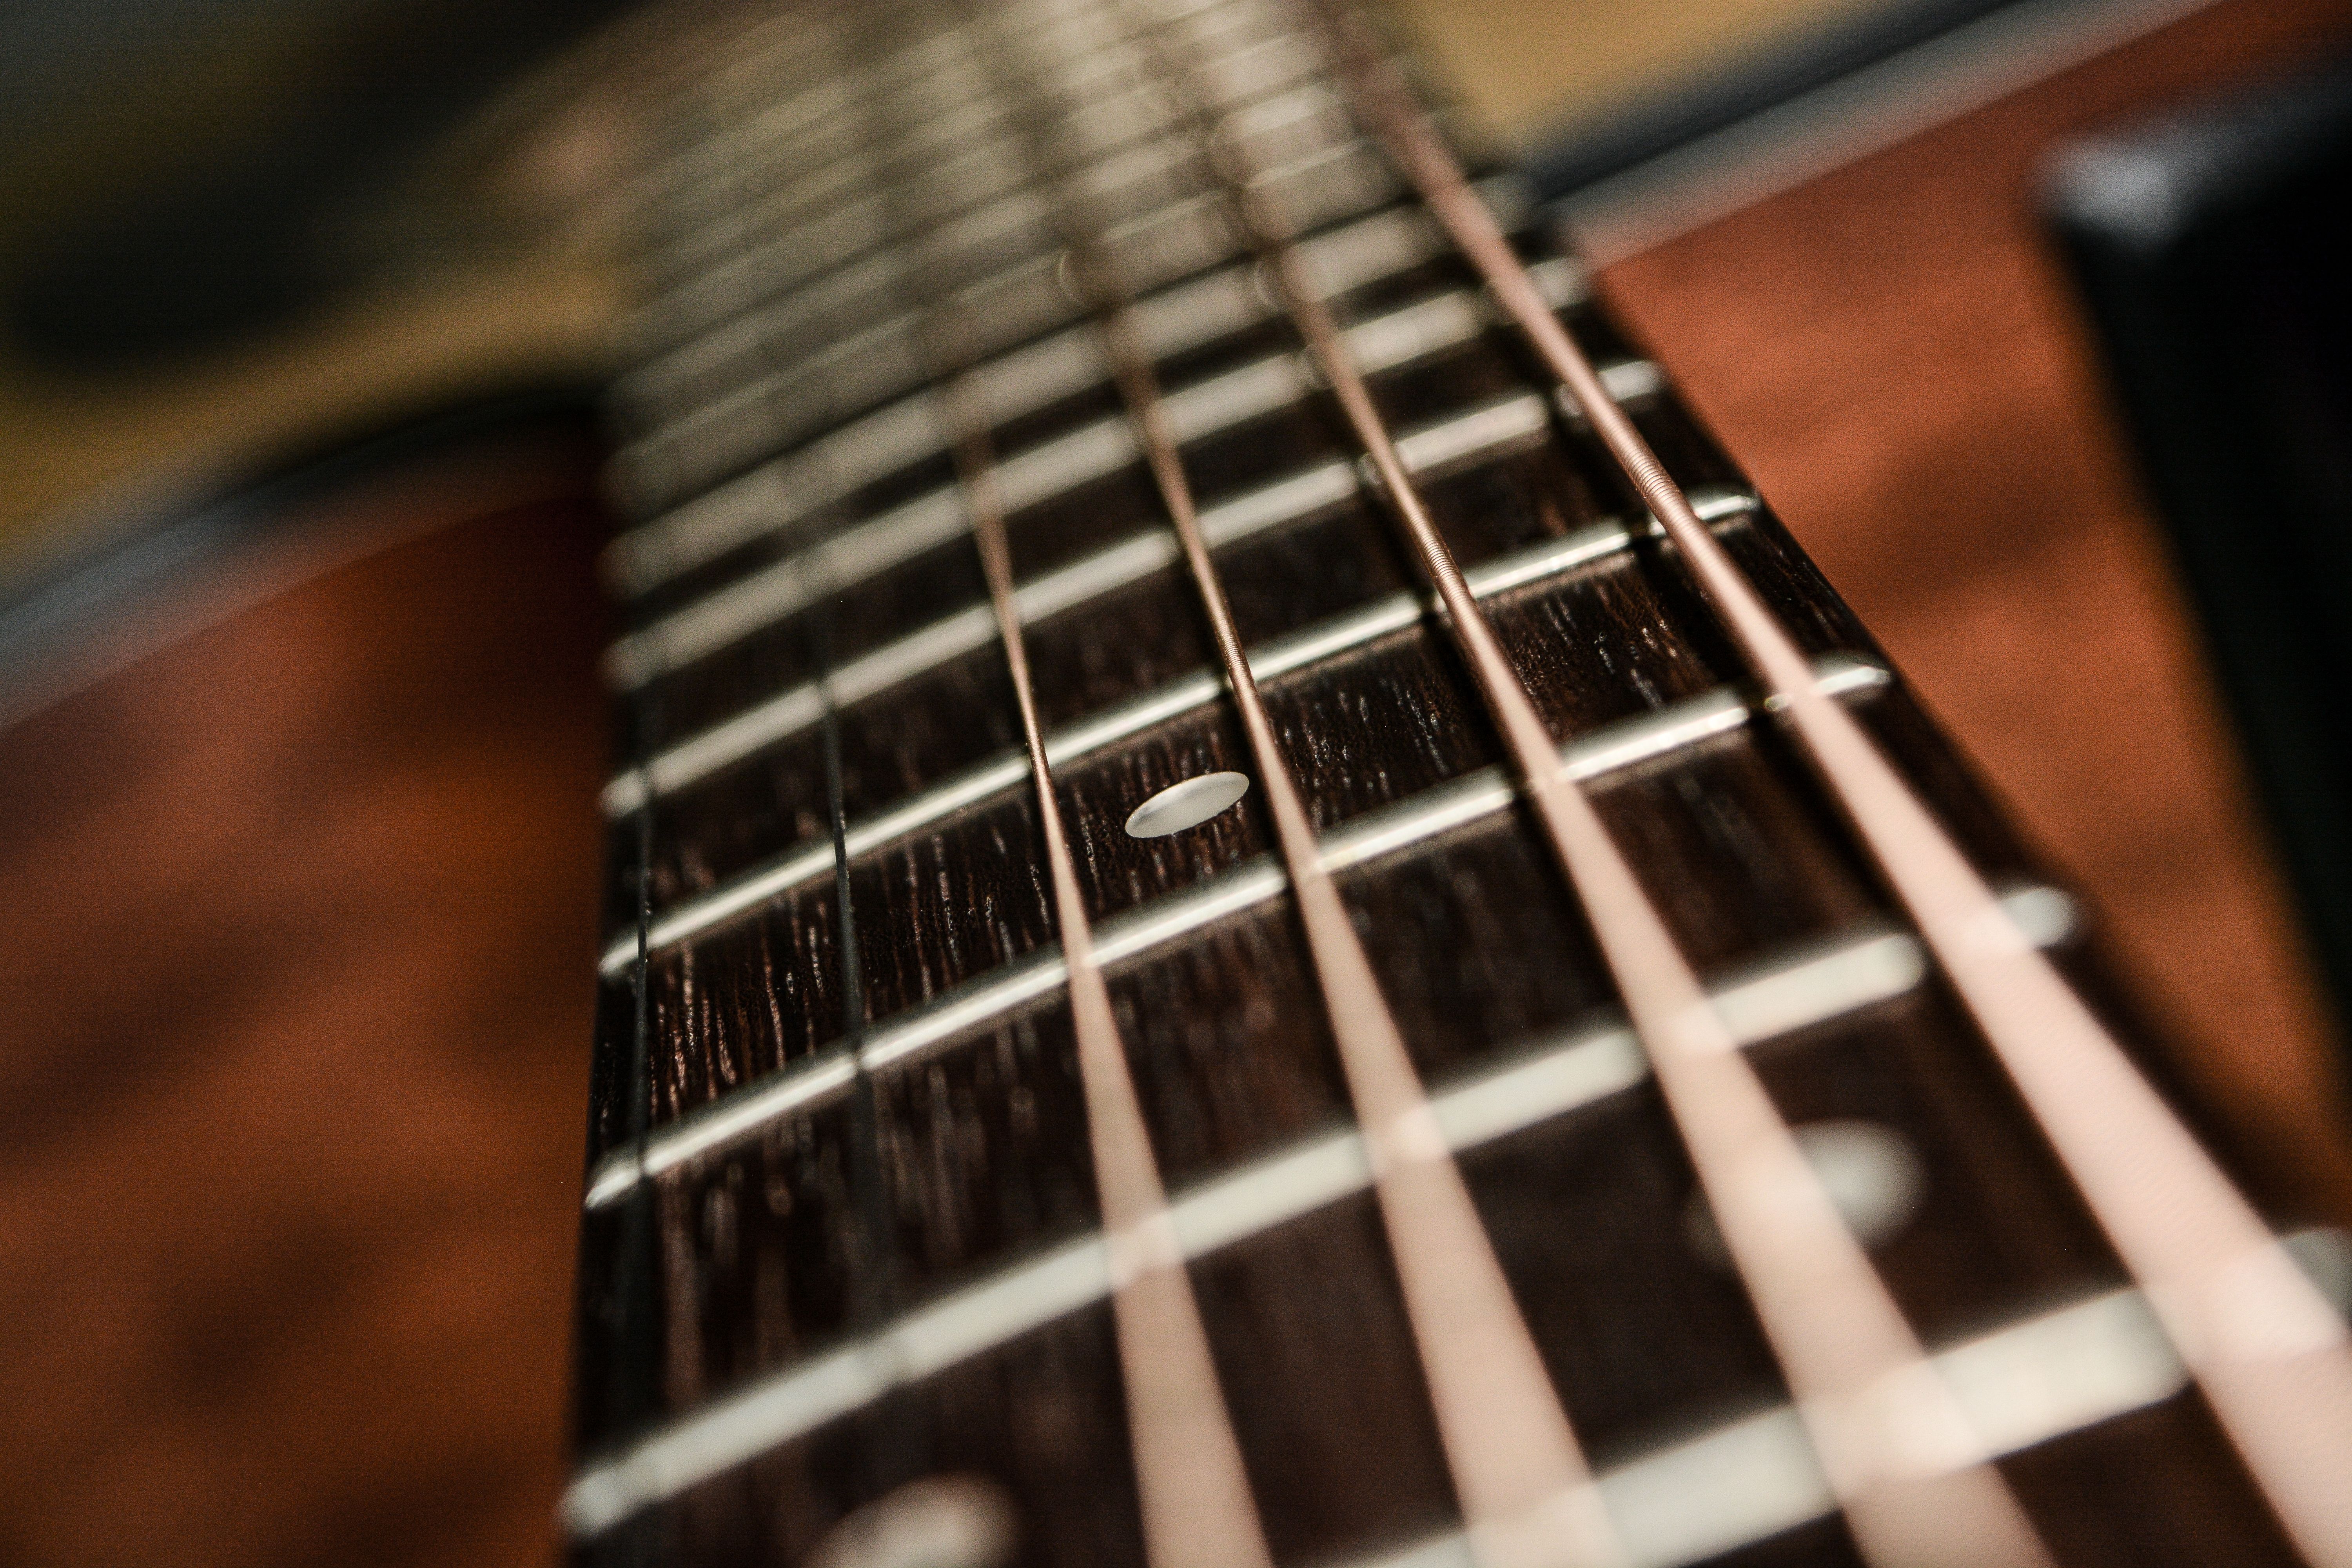 Acoustic Guitar D Series Image. Free Stock Image Library